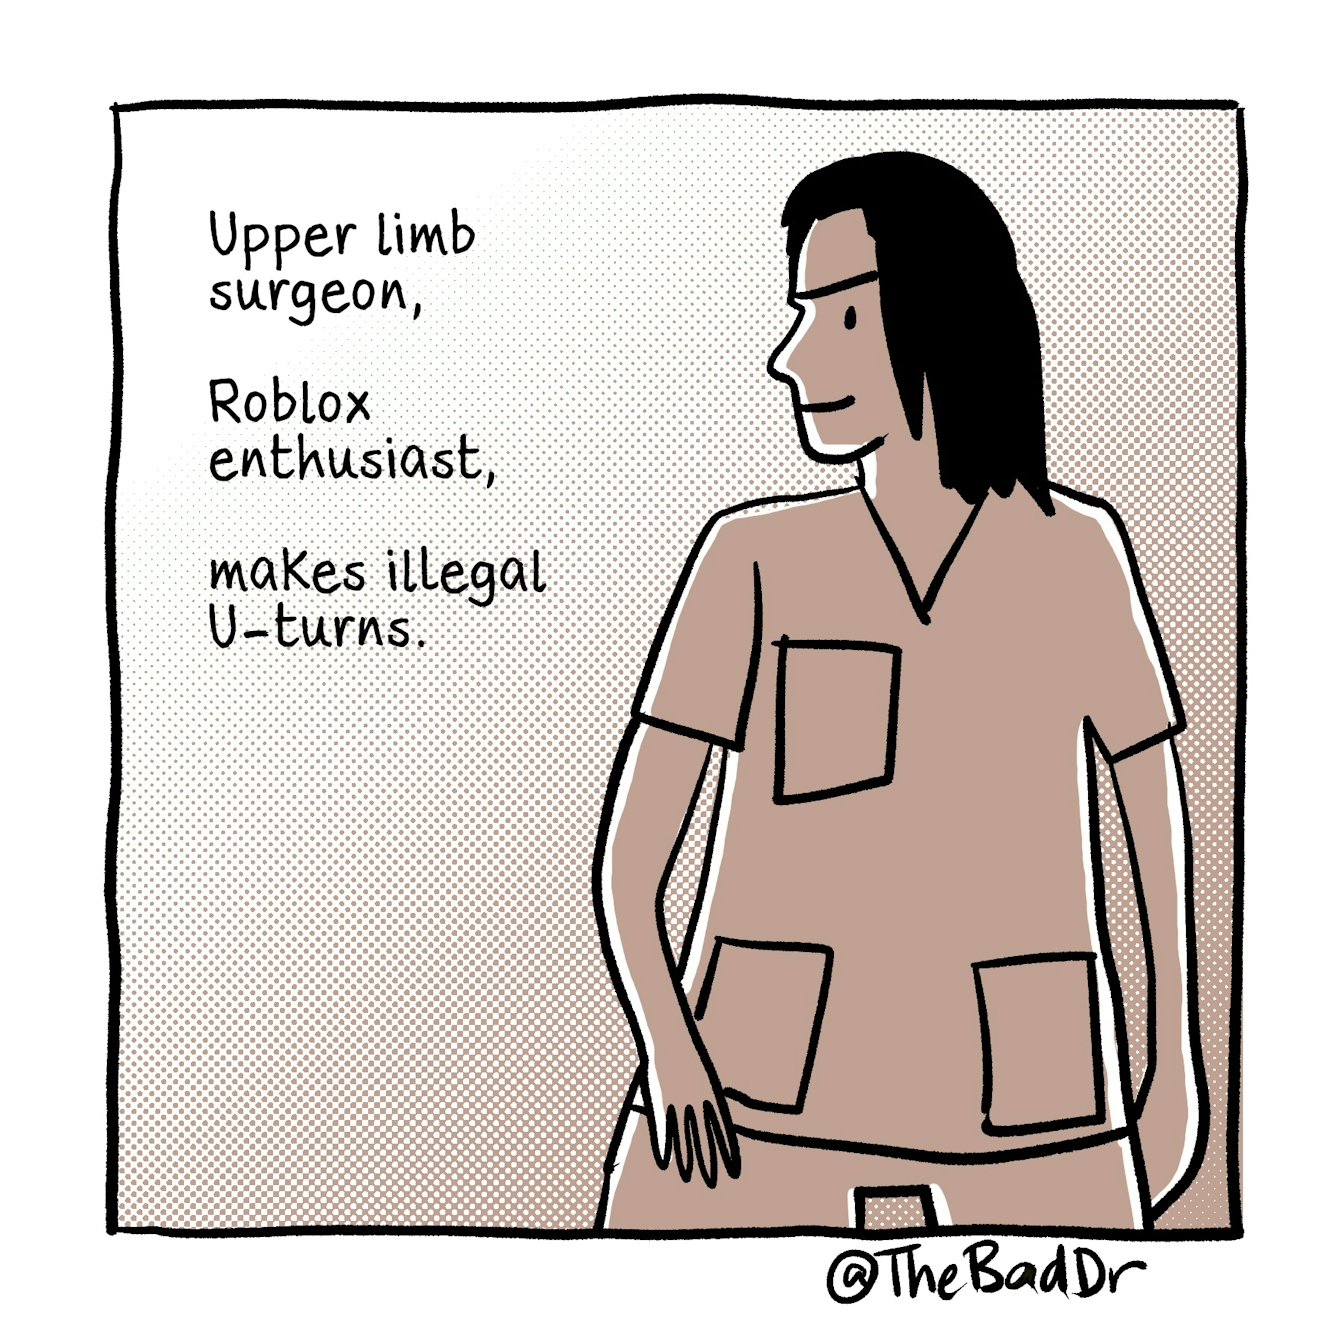 The forth and final panel shows a young female doctor standing in her scrubs, looking to the left. The text next to her reads, "Upper limb surgeon... Roblox enthusiast... makes illegal U-turns."